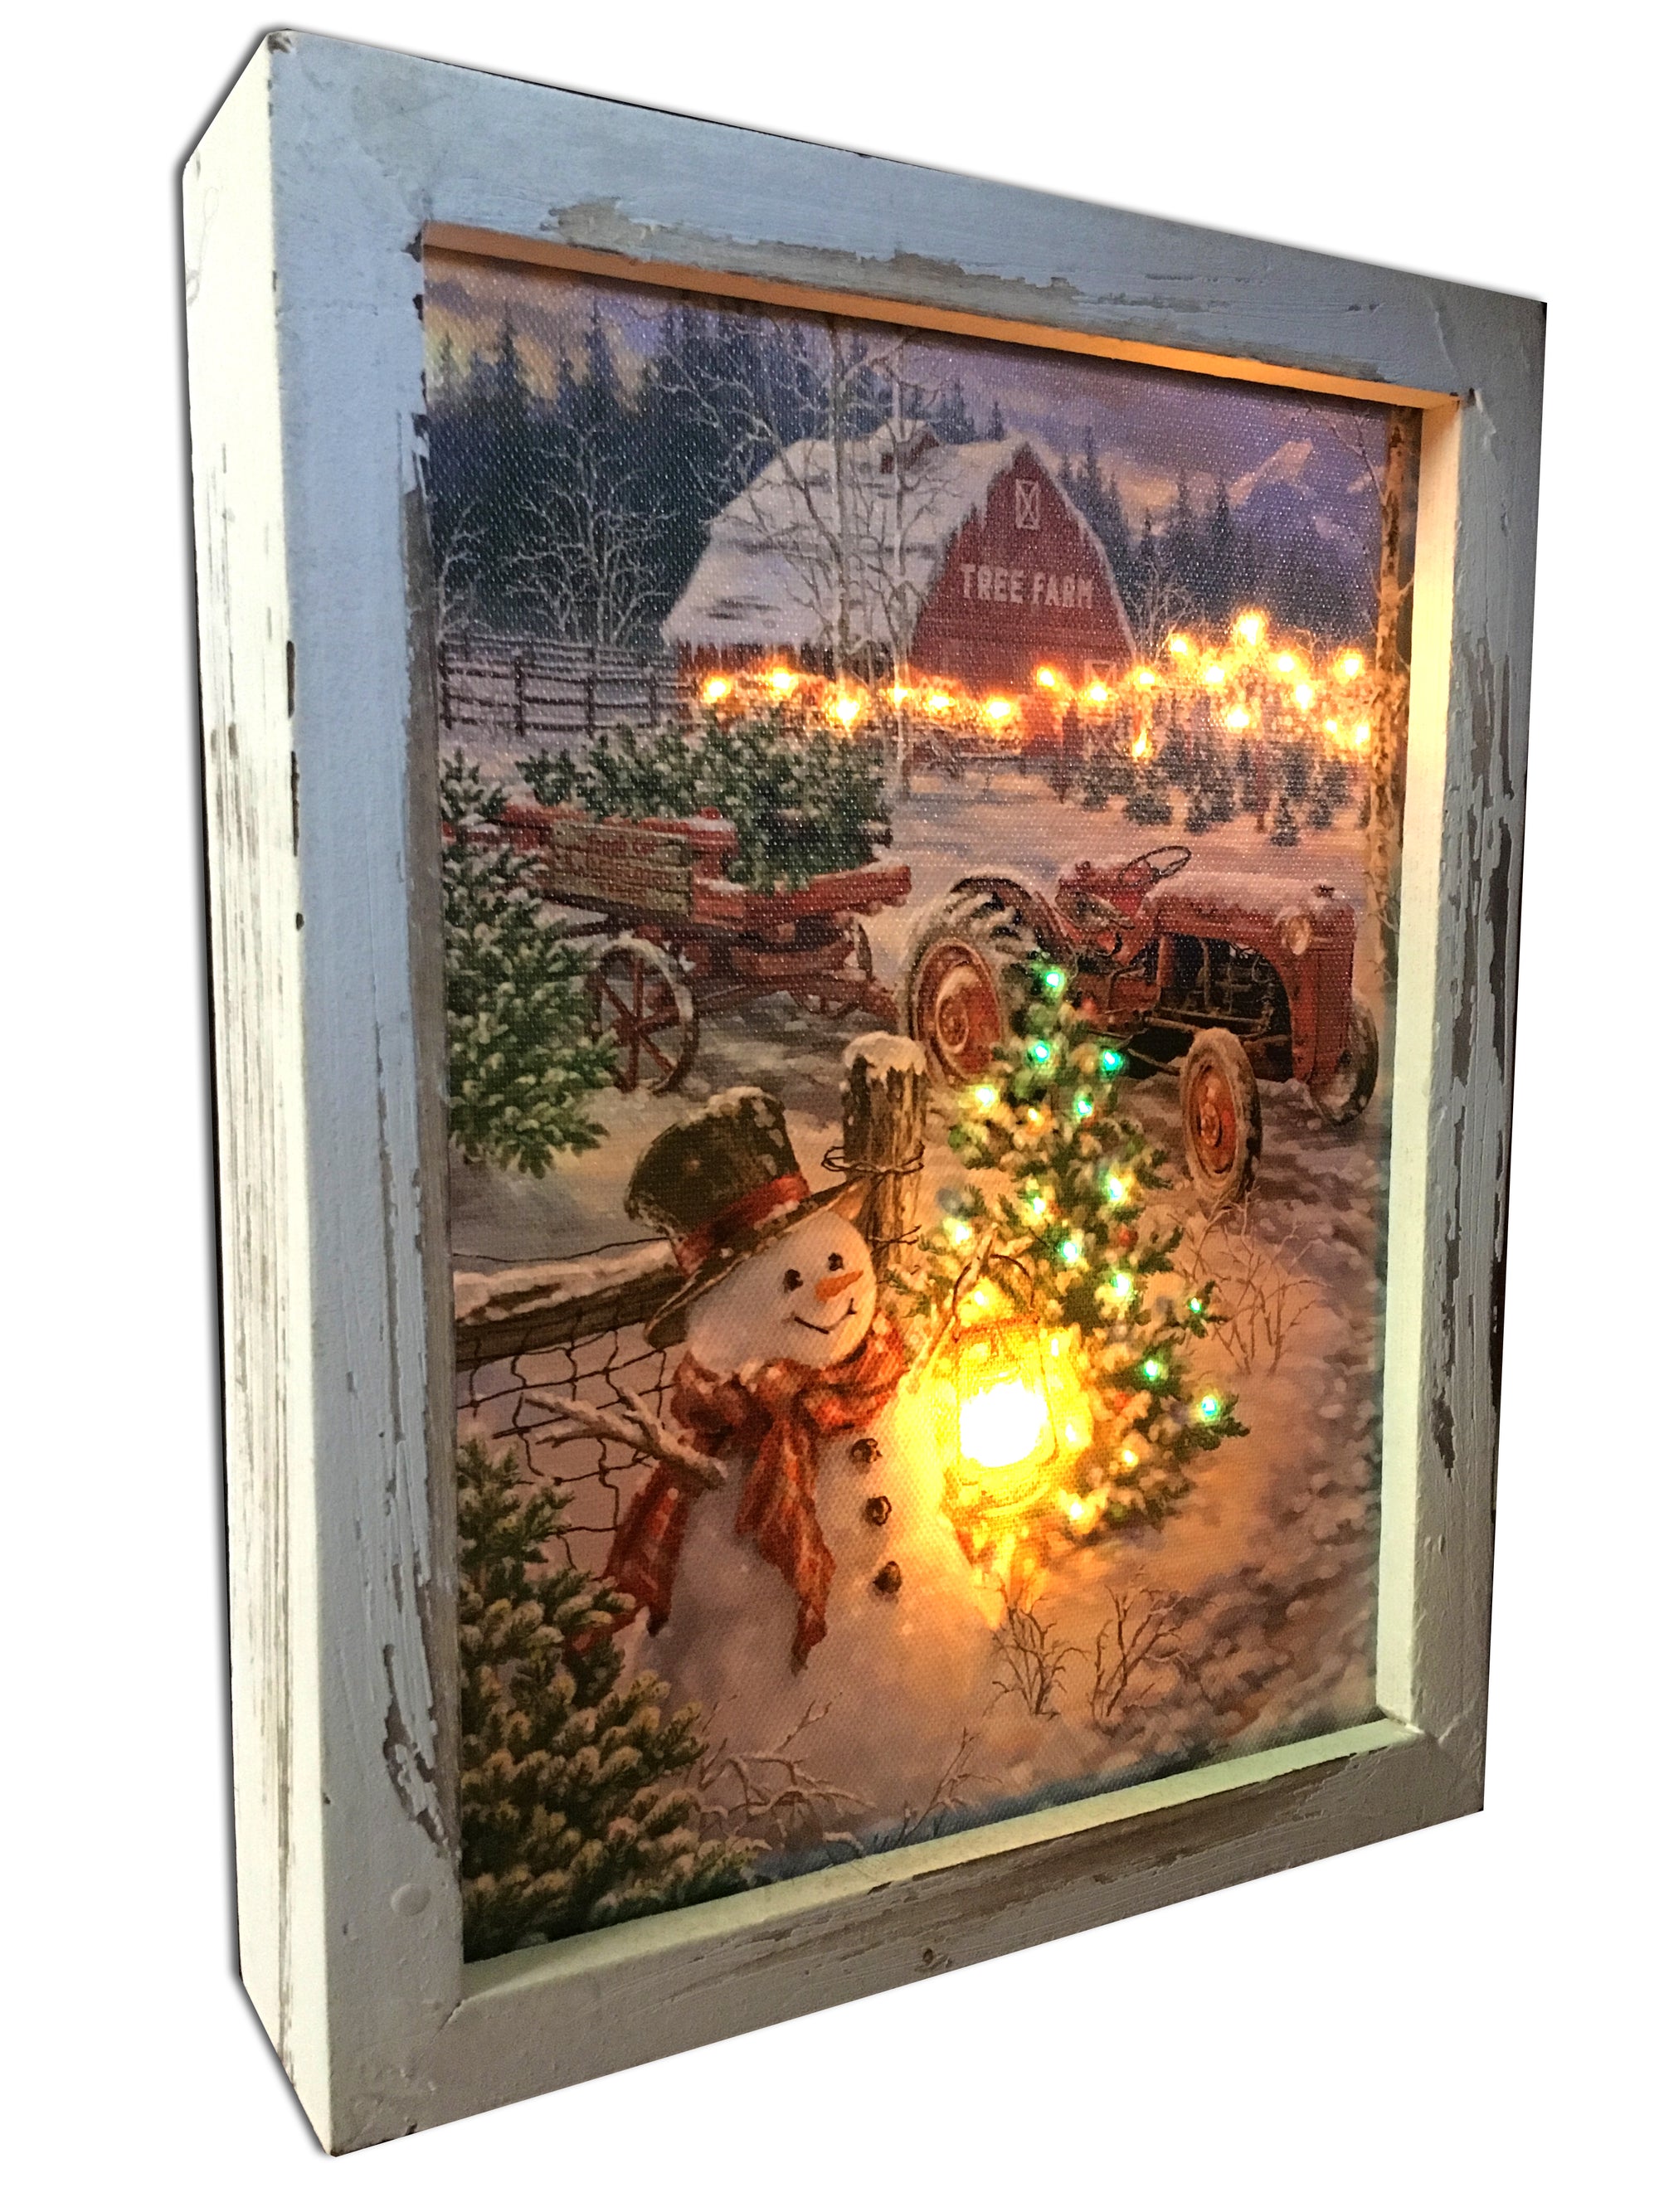 This charming piece features a happy snowman standing proudly amidst a beautiful winter wonderland. Dressed in a top hat, scarf, and carrying a lantern, he's ready to spread joy and cheer.  Behind him, a breathtaking scene unfolds - a picturesque Christmas tree farm filled with rows of stunning evergreens. The closest tree is adorned with bright, twinkling lights, adding a warm and cozy glow to the scene. And in the distance, a barn and tractor can be seen.